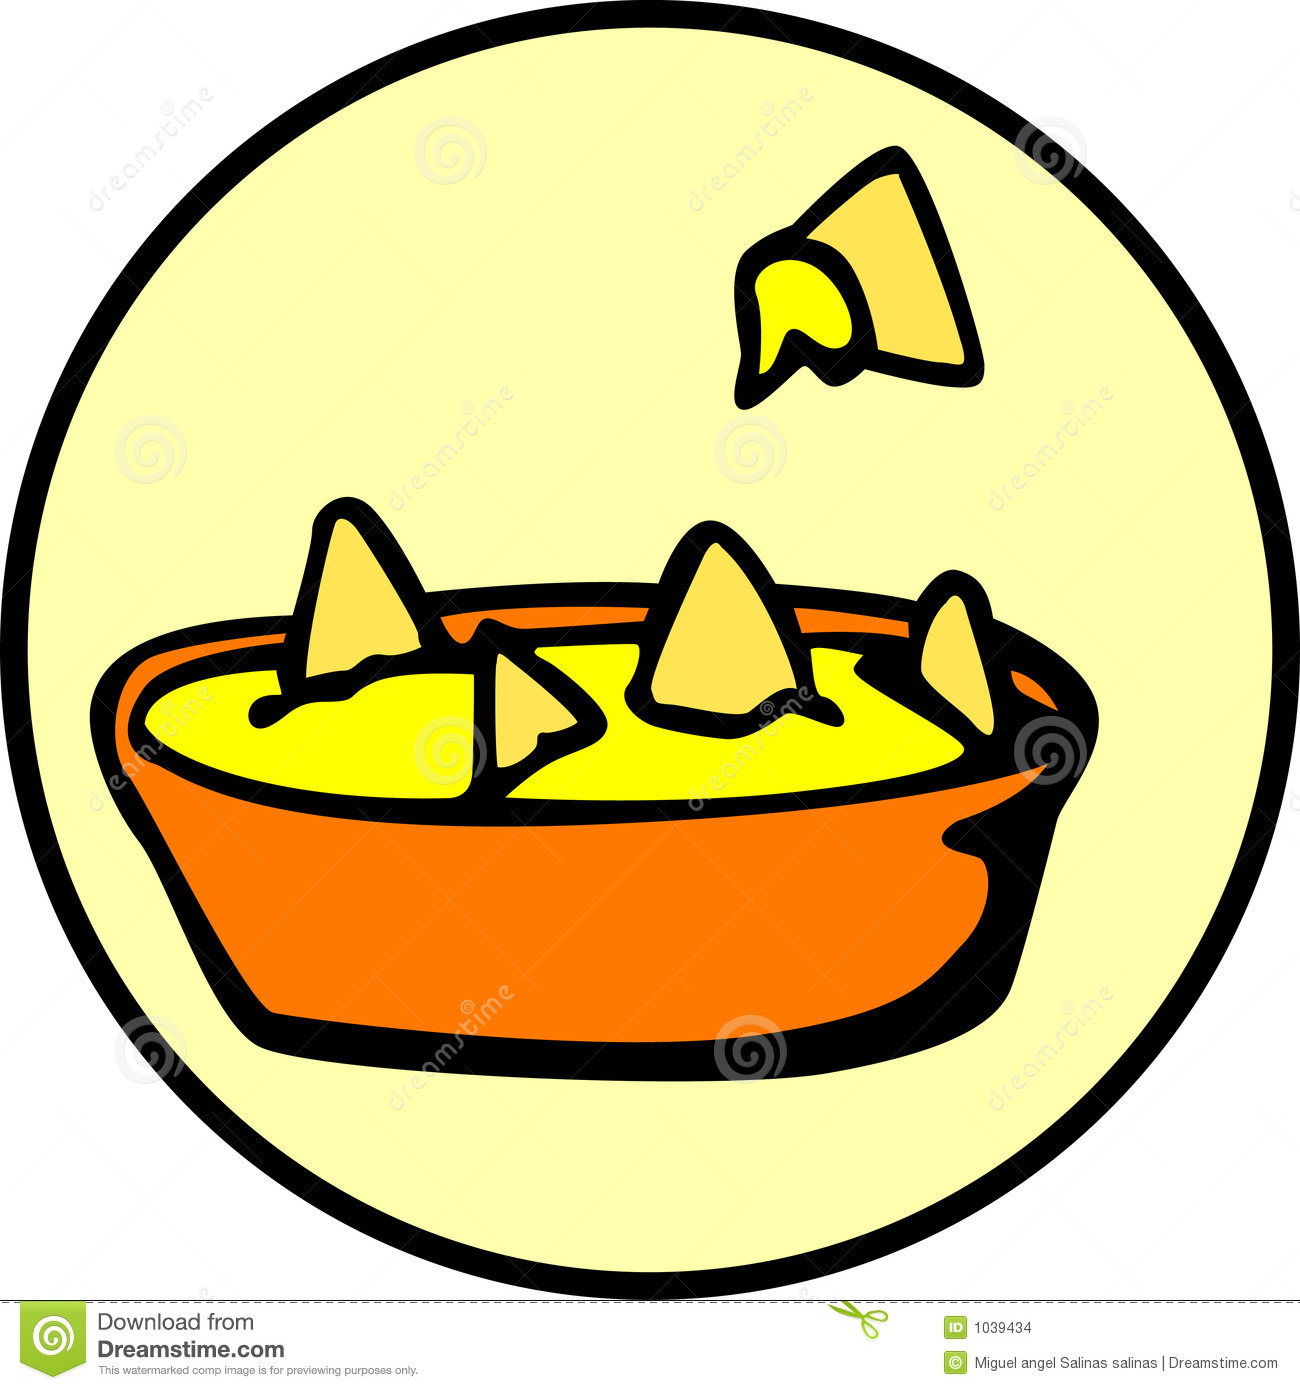 Nachos With Cheese Snack  Vector File Available Stock Images   Image